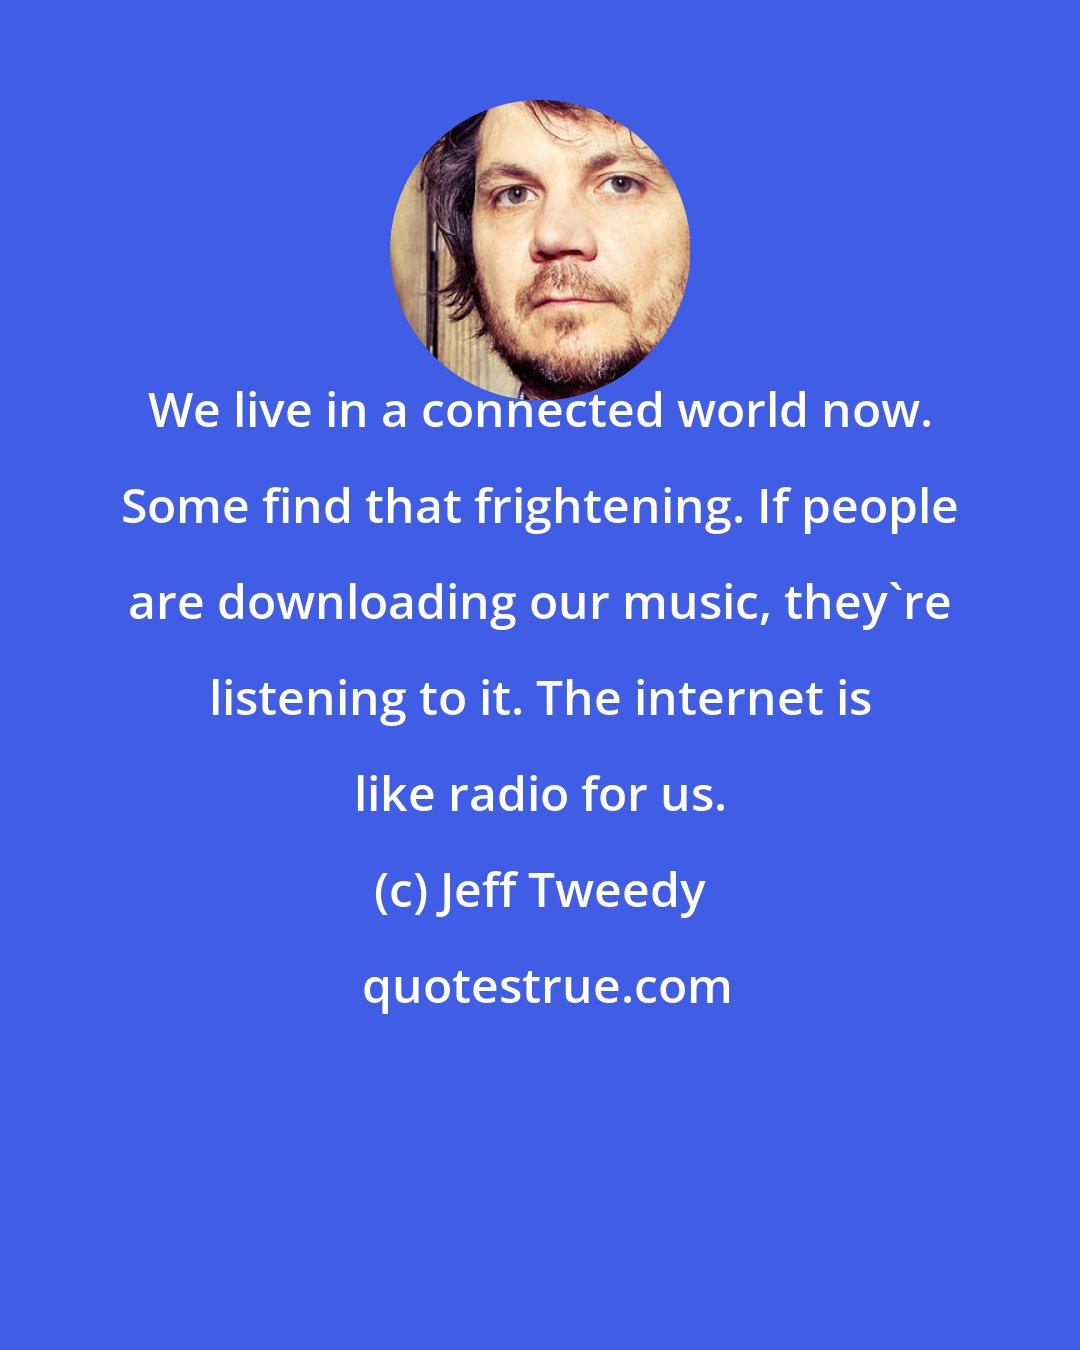 Jeff Tweedy: We live in a connected world now. Some find that frightening. If people are downloading our music, they're listening to it. The internet is like radio for us.